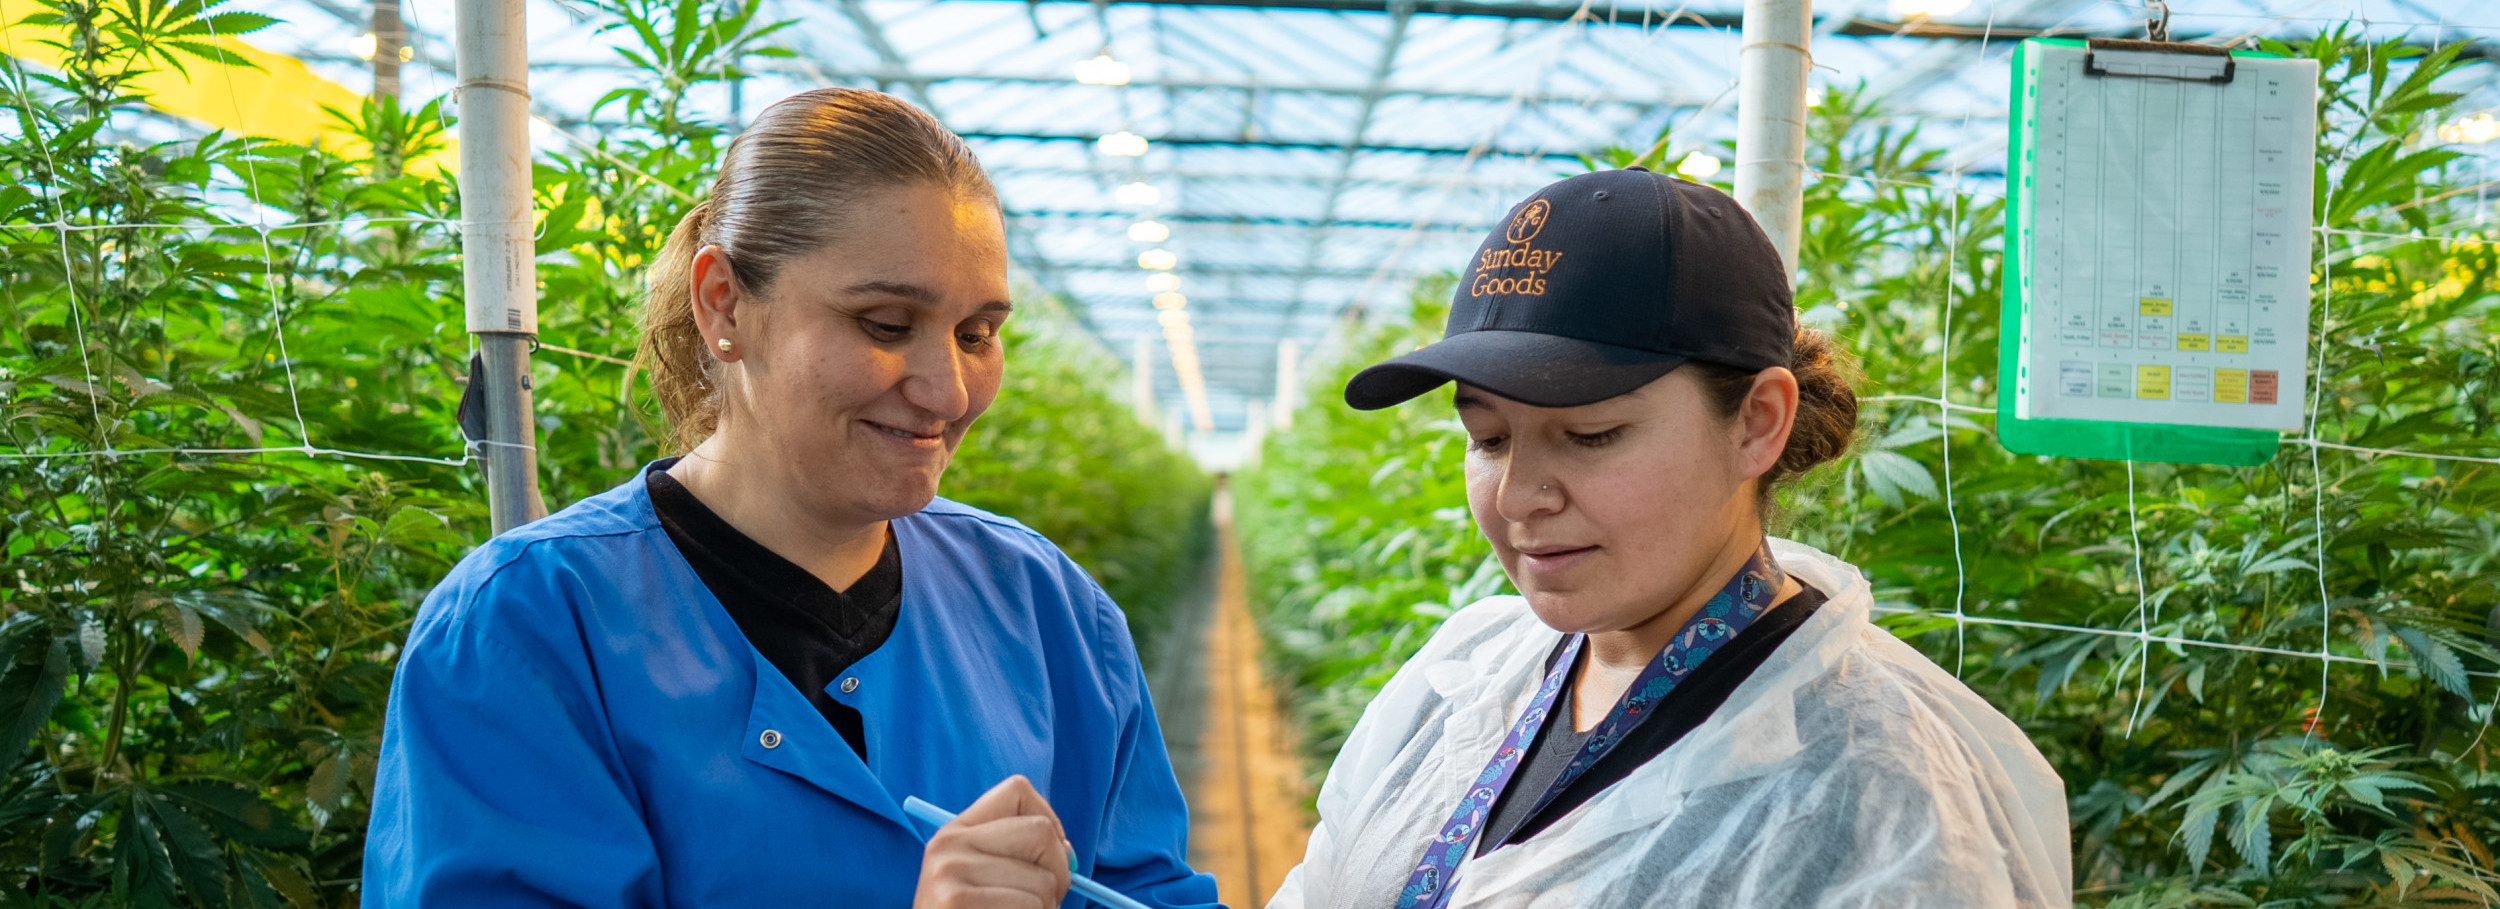 Two women working in a greenhouse